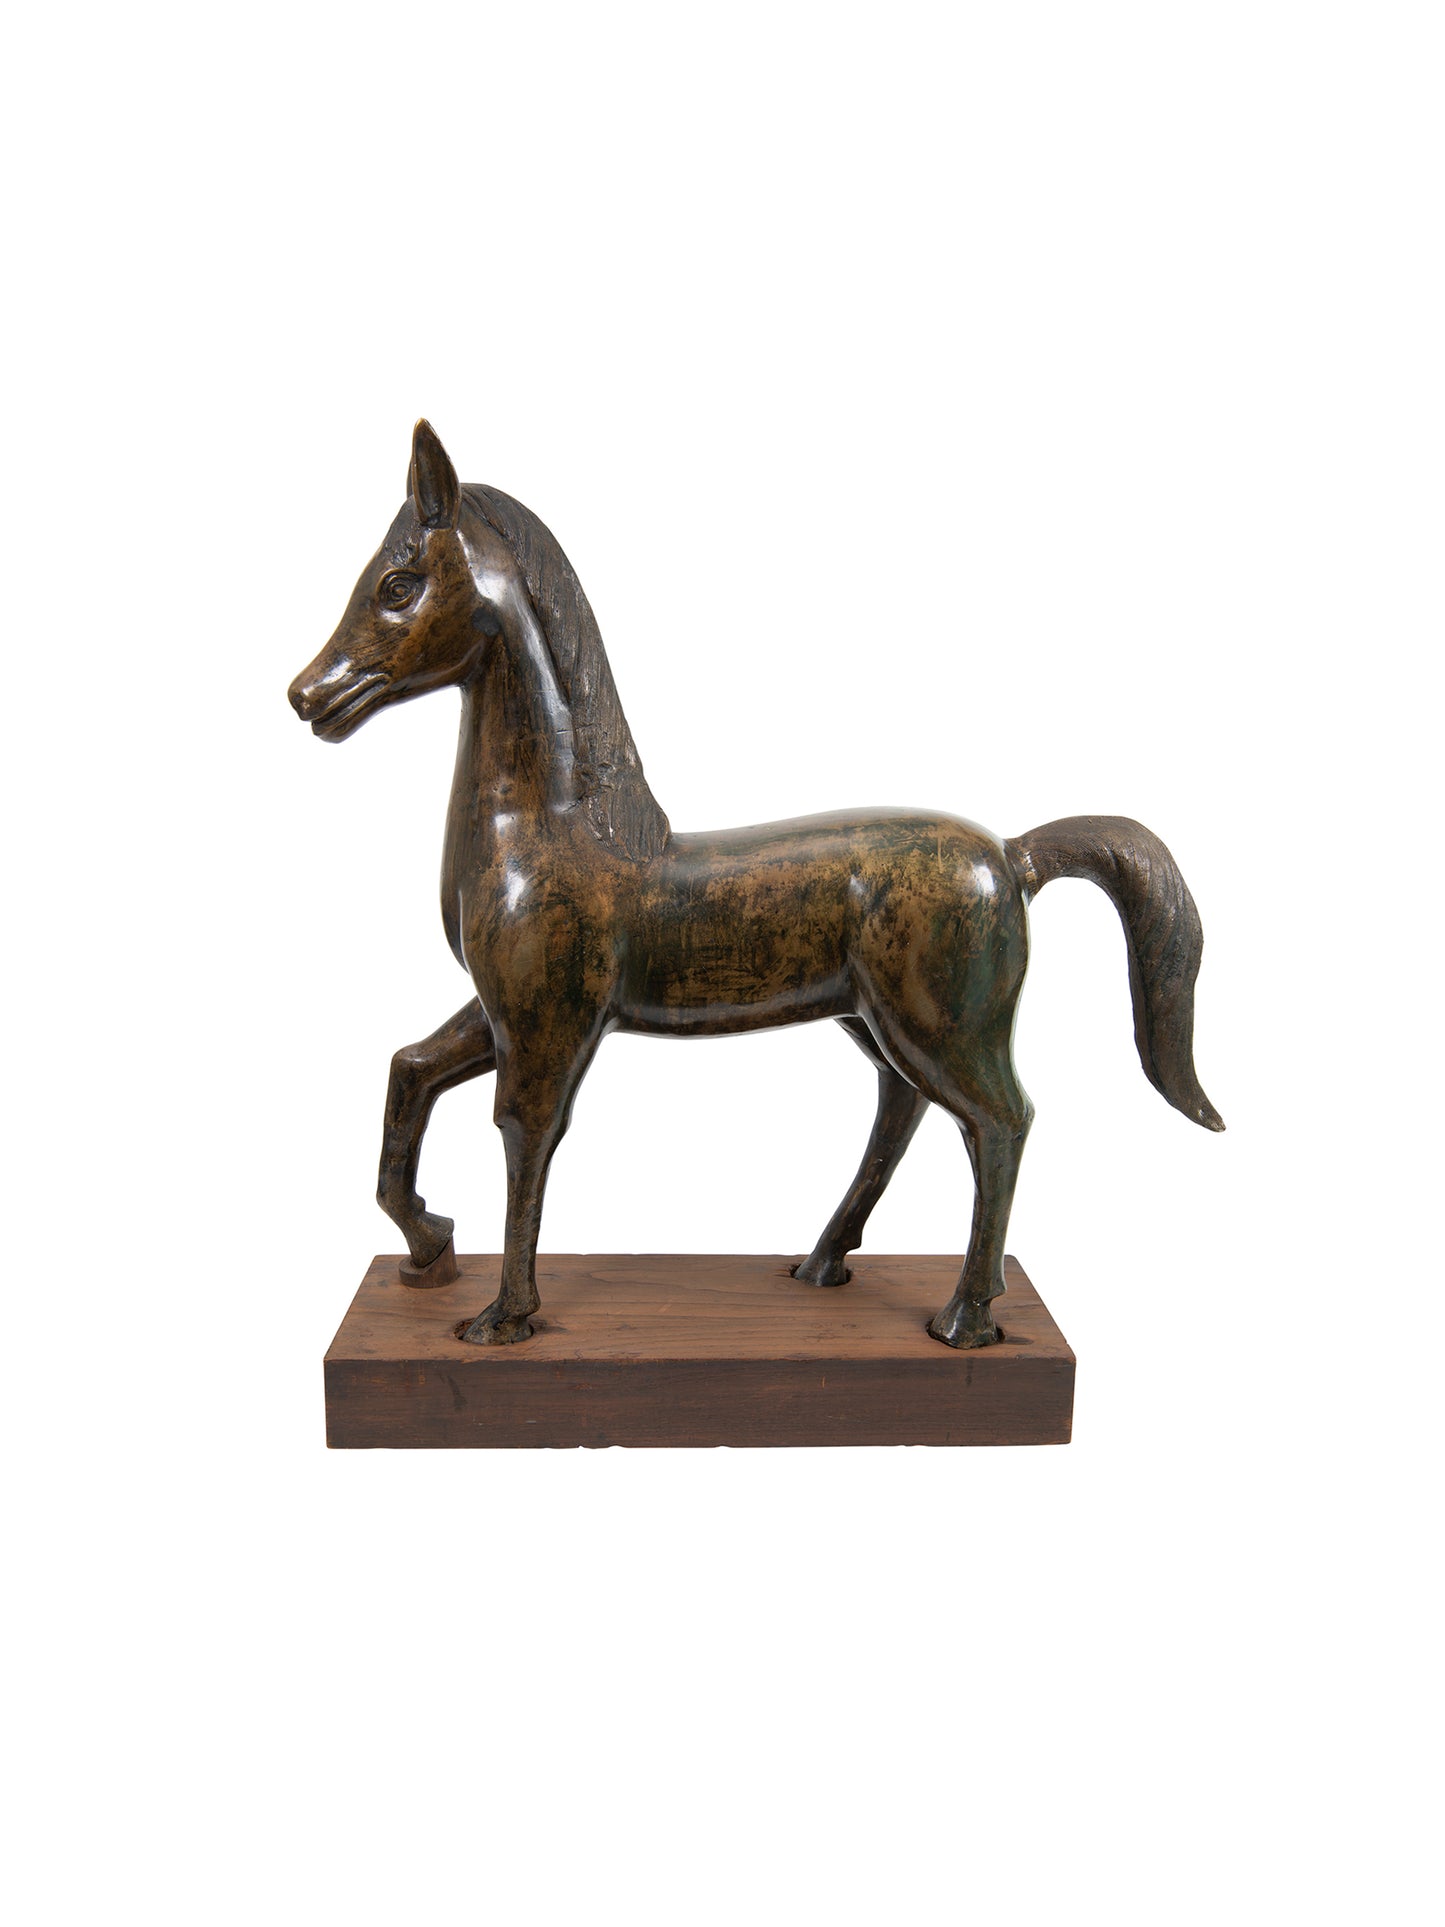 Vintage 1920s French Bronze Horse Sculpture Weston Table